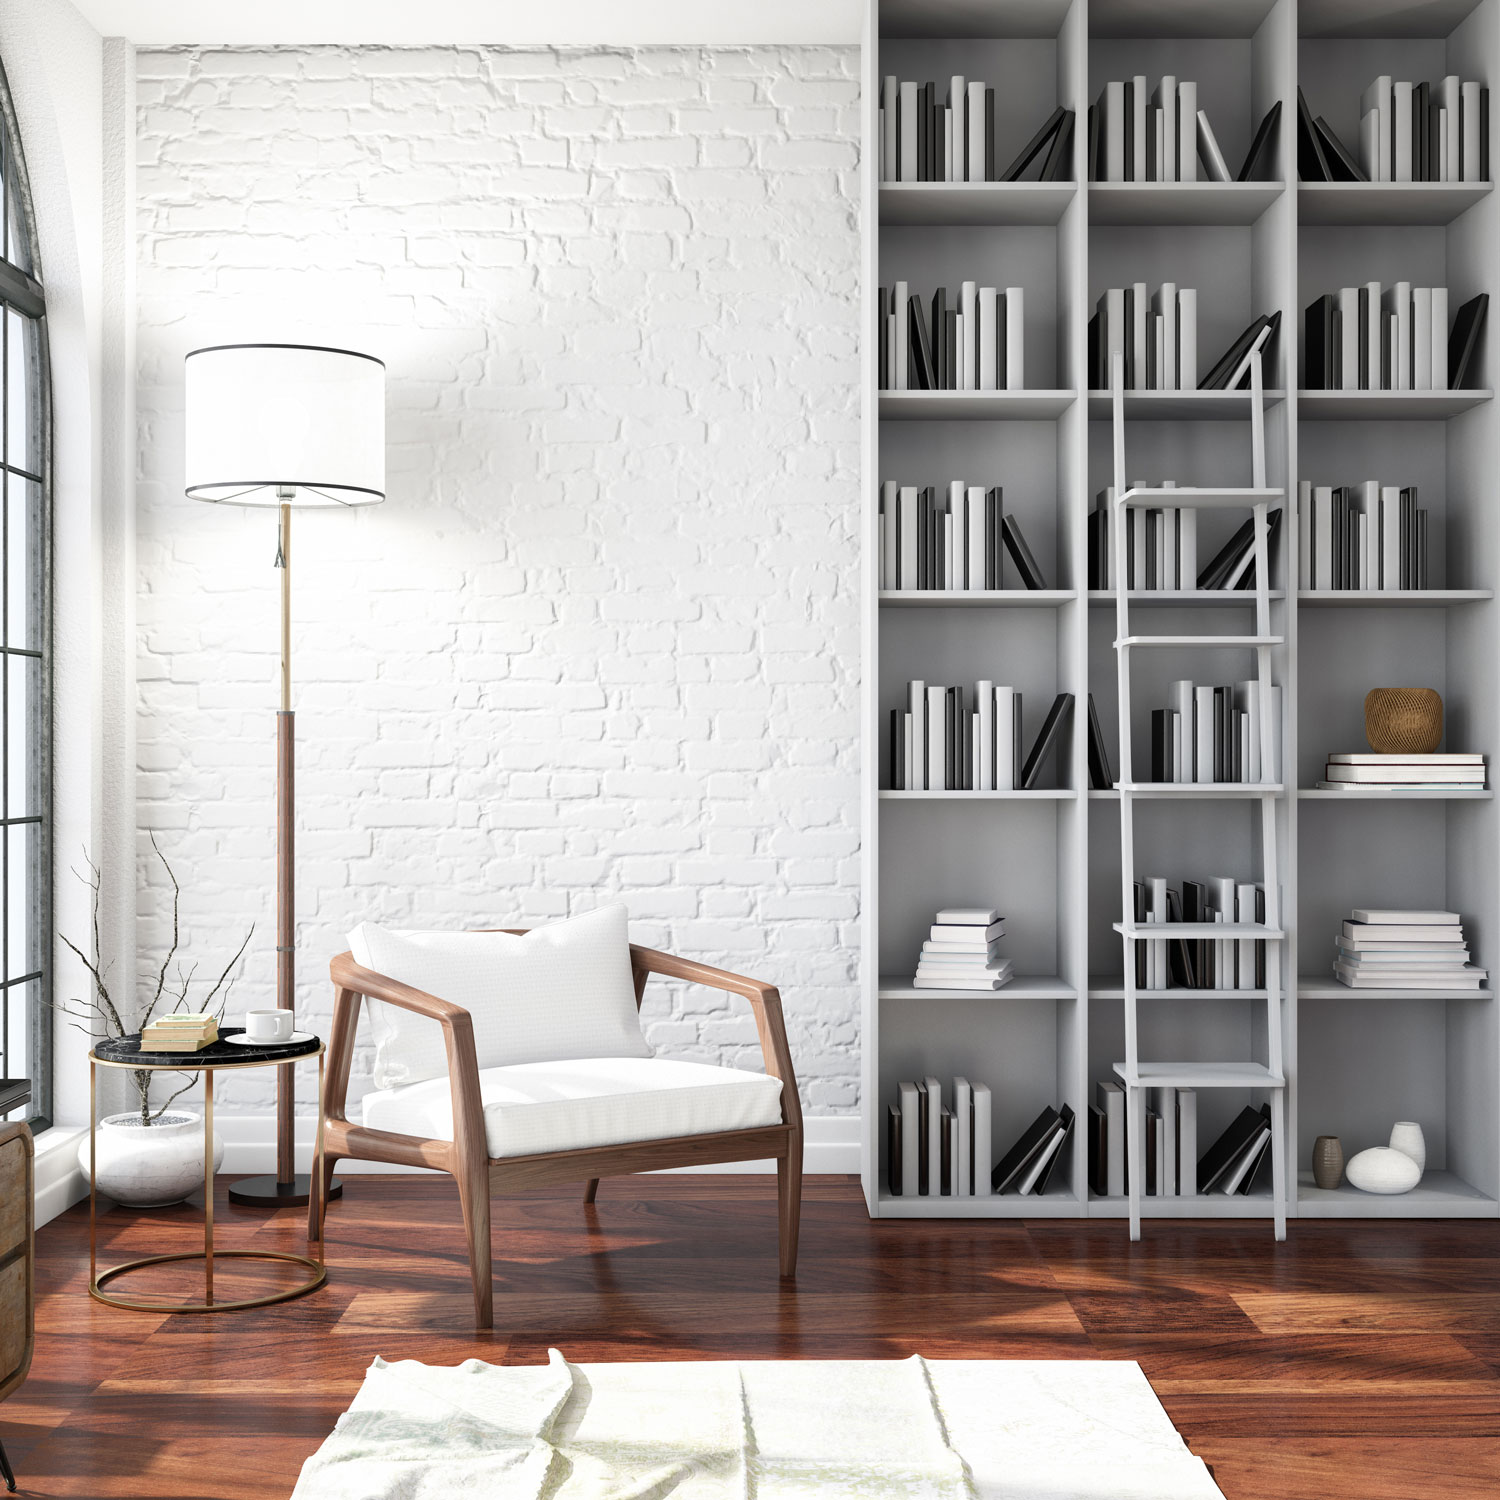 A gorgeous reading or work area with a gray bookshelf filled with books